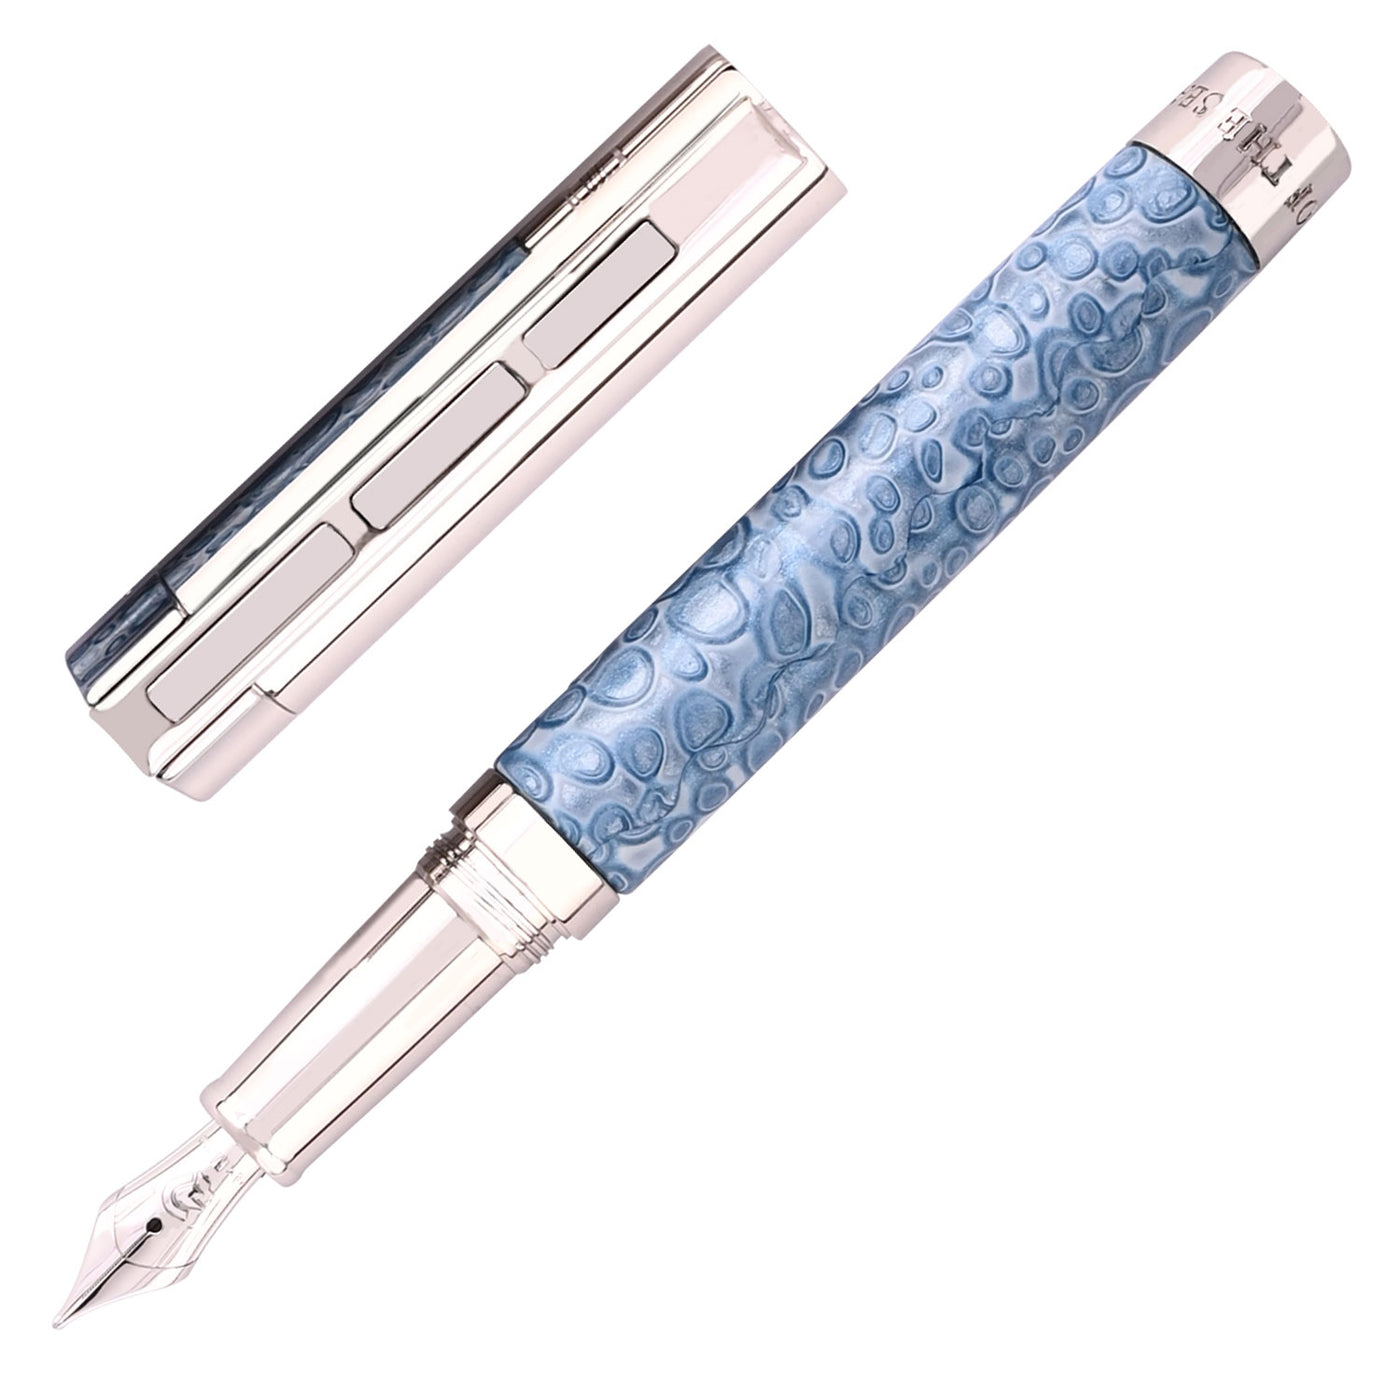 Staedtler Premium Pen of the Season Fountain Pen - Blue CT (Limited Edition)